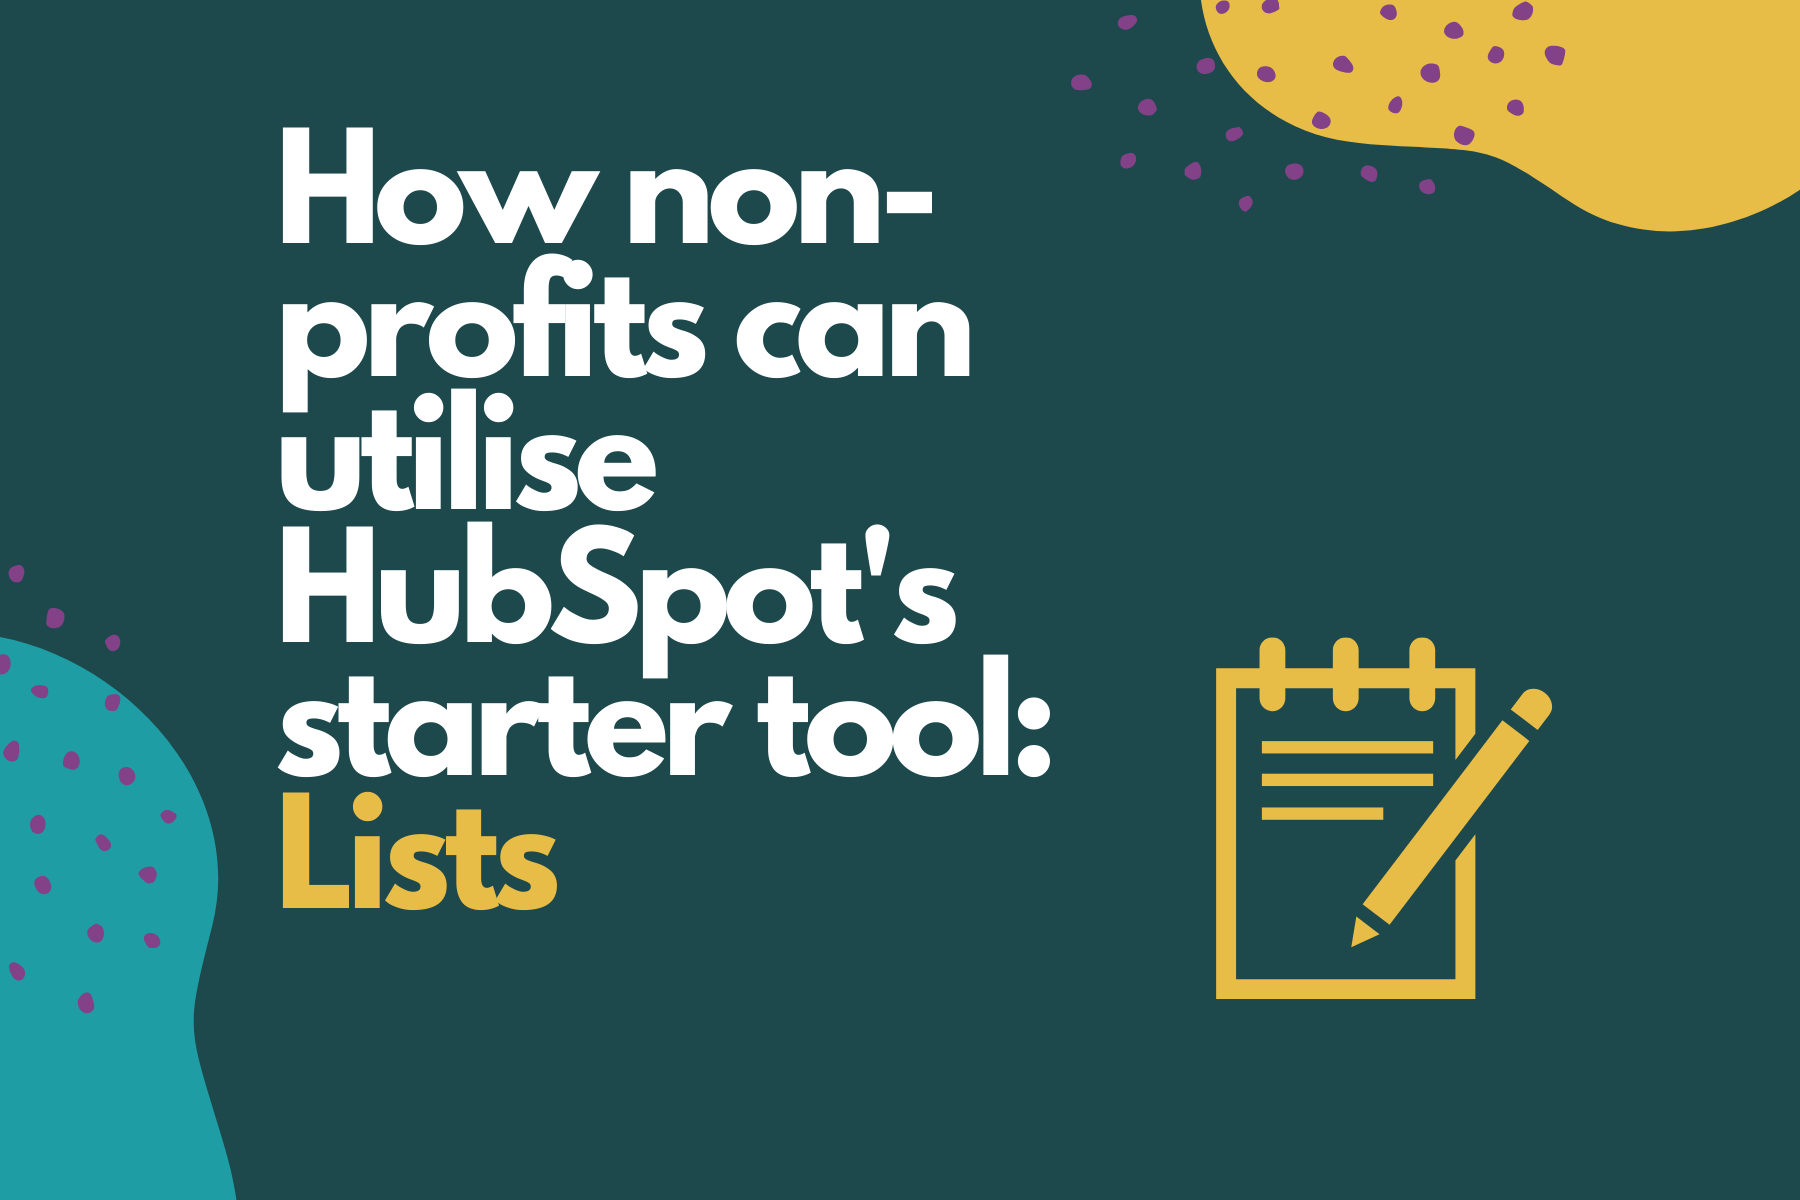 How non-profits can utilise HubSpot's Starter tool: Lists